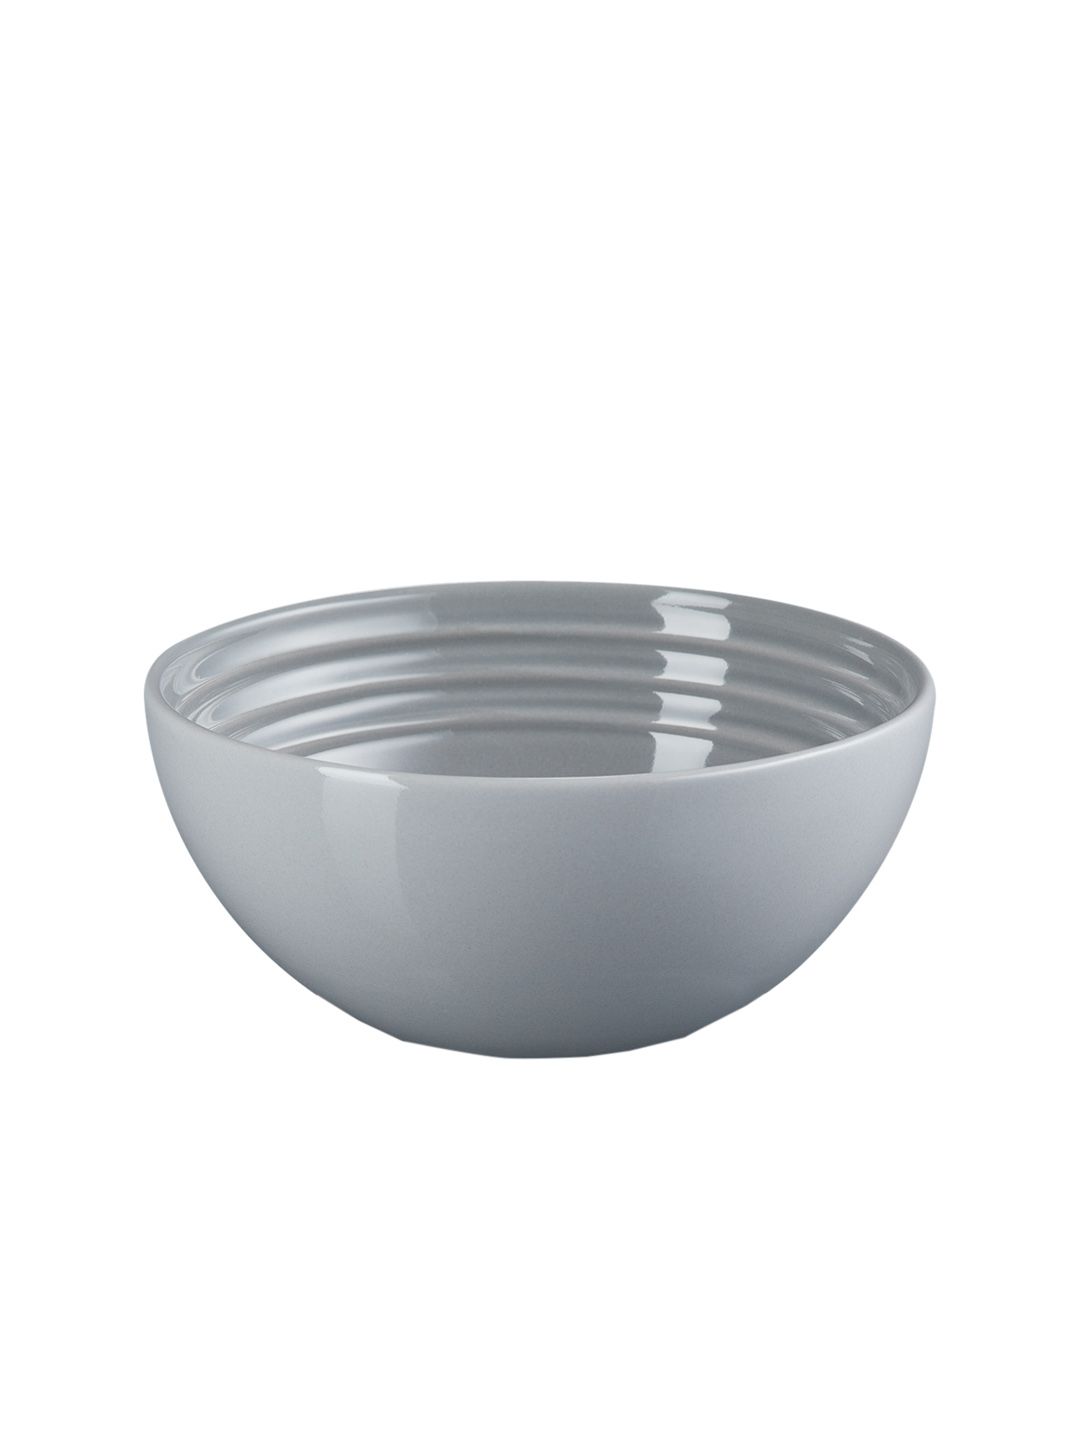 LE CREUSET Kitchen Serve Bowl Price in India